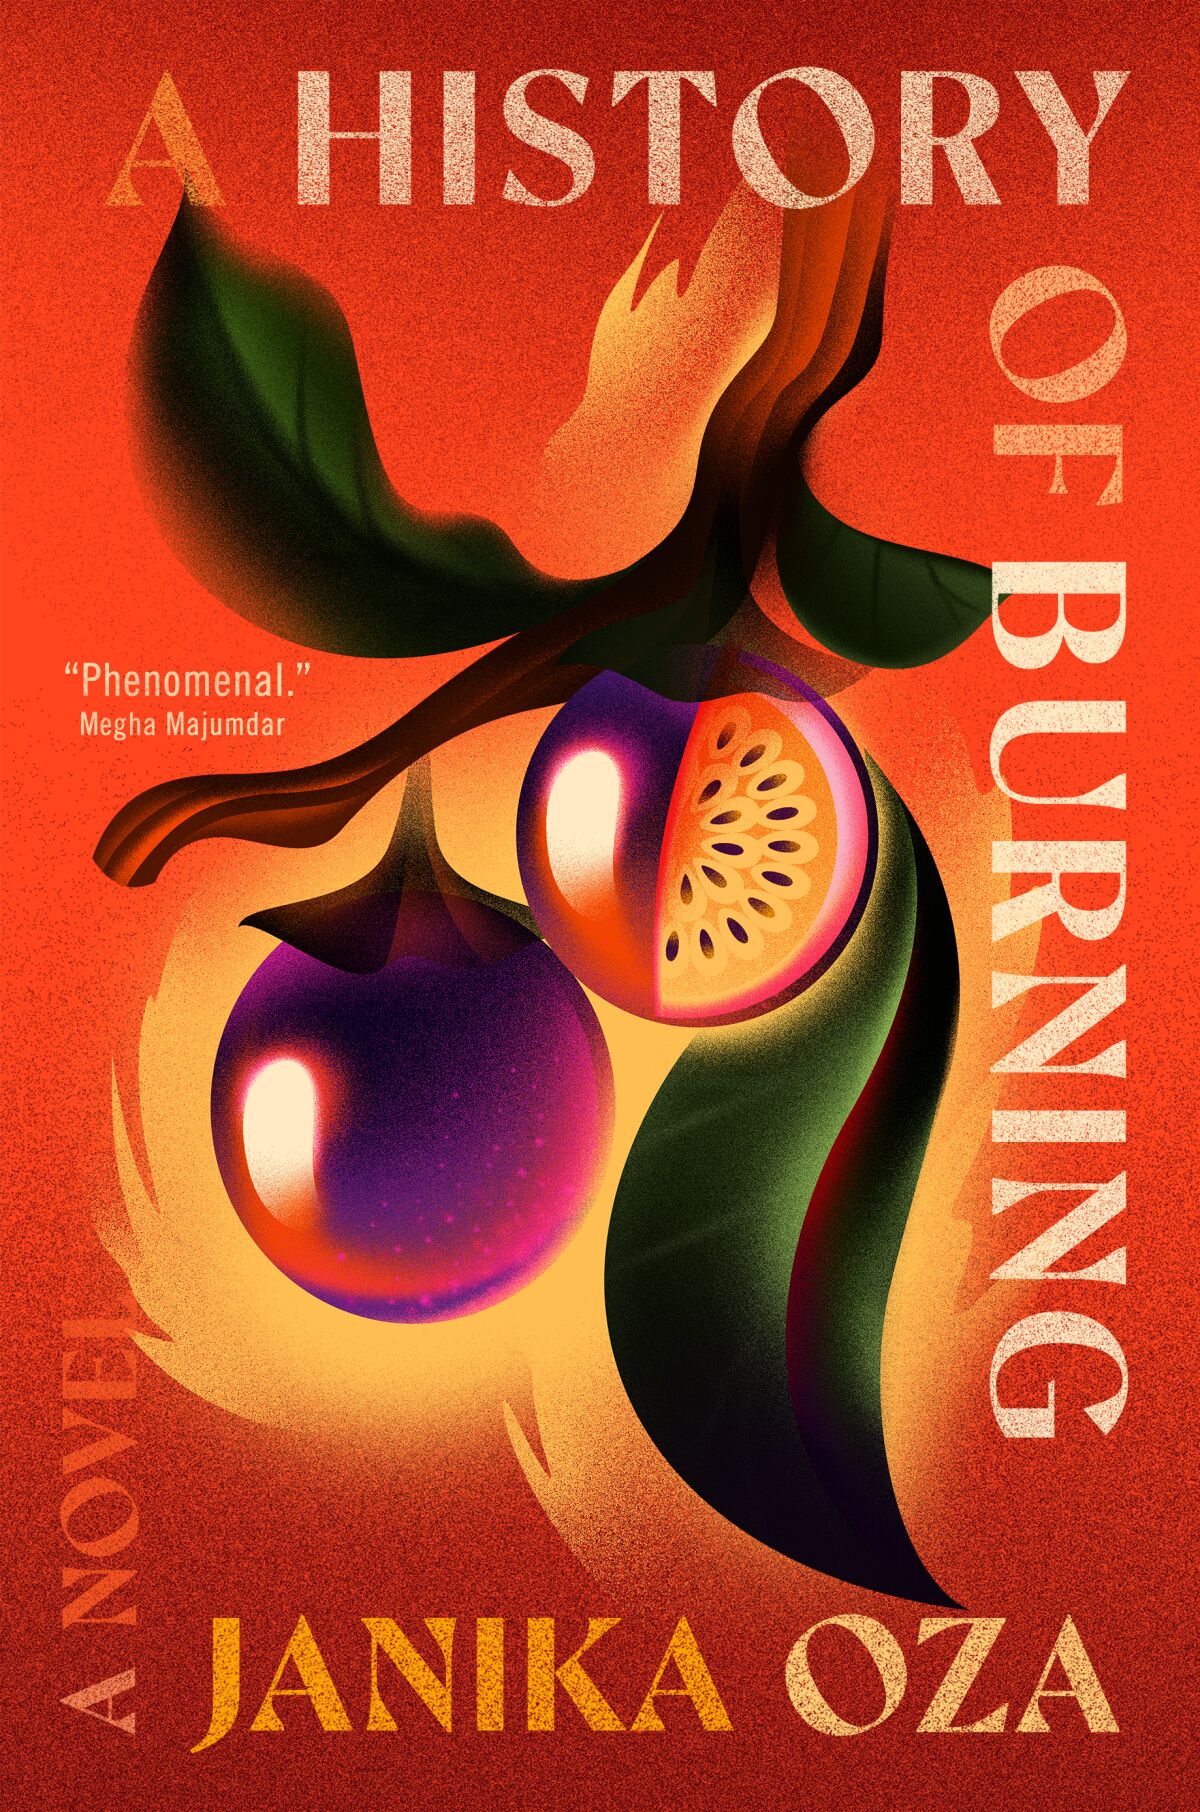 The cover of "A History of Burning" by Janika Oza shows fruit hanging from a branch